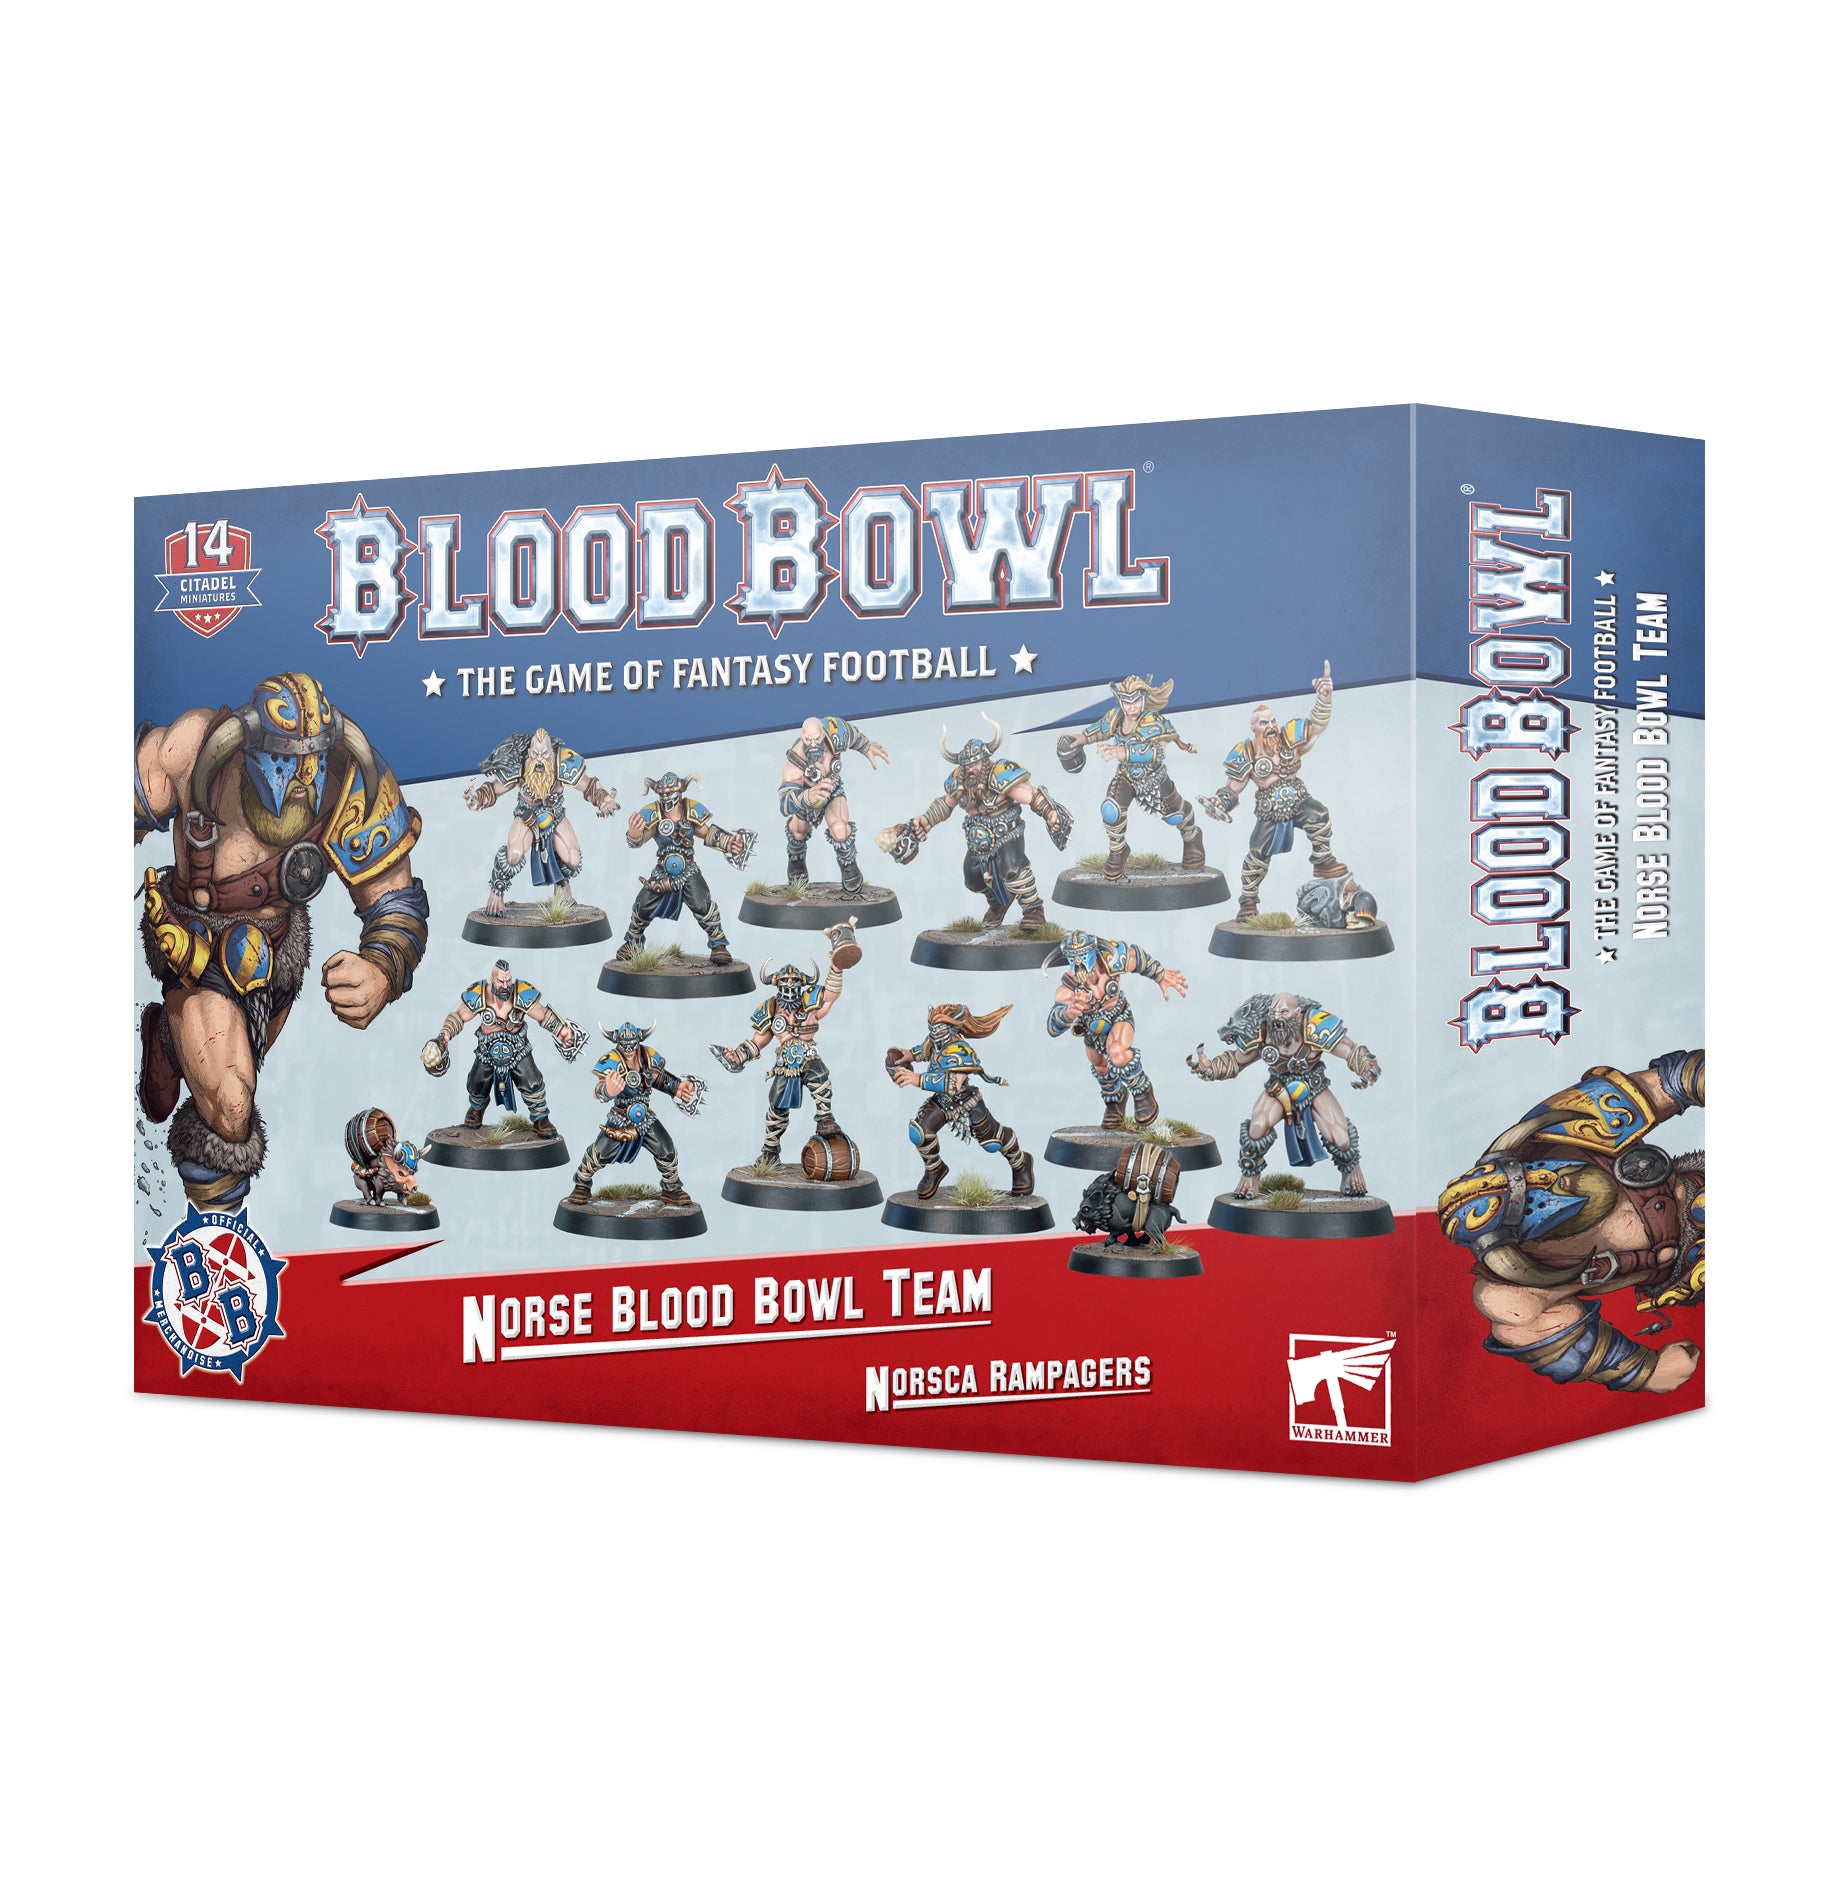 Blood Bowl: Norse Blood Bowl Team: Norsca Rampagers